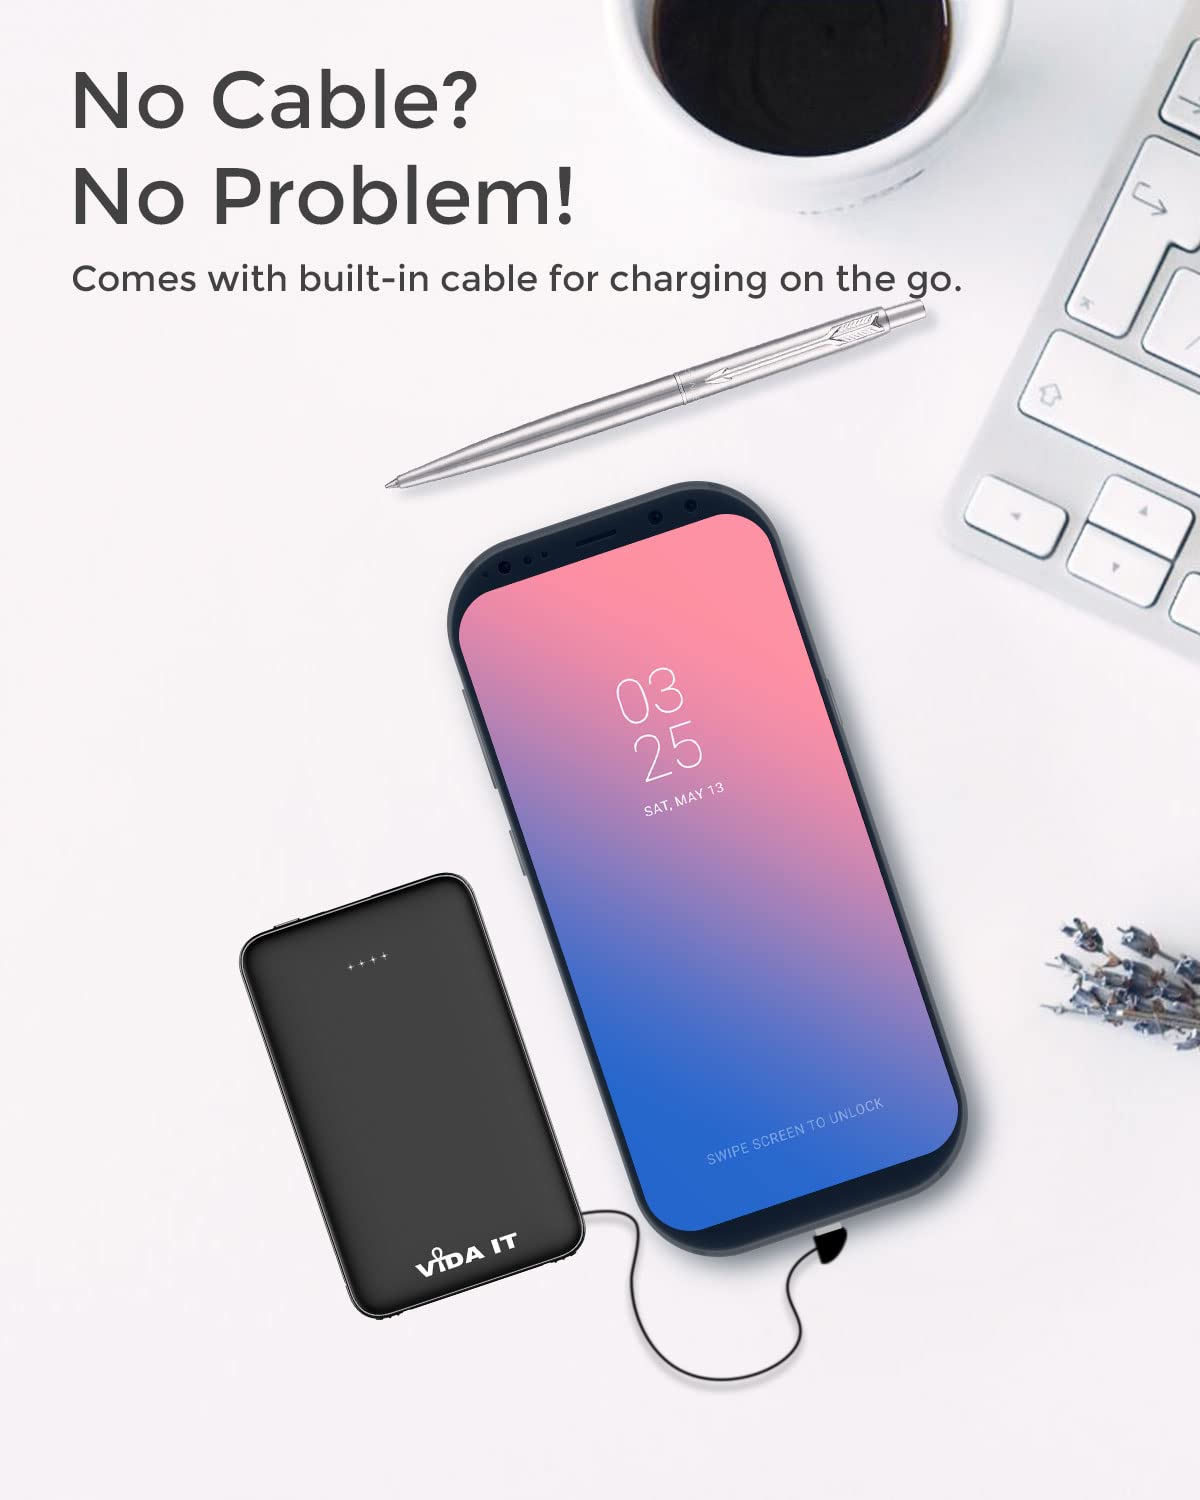 Vida IT vBot Power Bank Portable Charger Battery Pack for Samsung Galaxy S21 S20 S10 S8 A51 Android Mobile Phone Power Pack with Built-In Cable